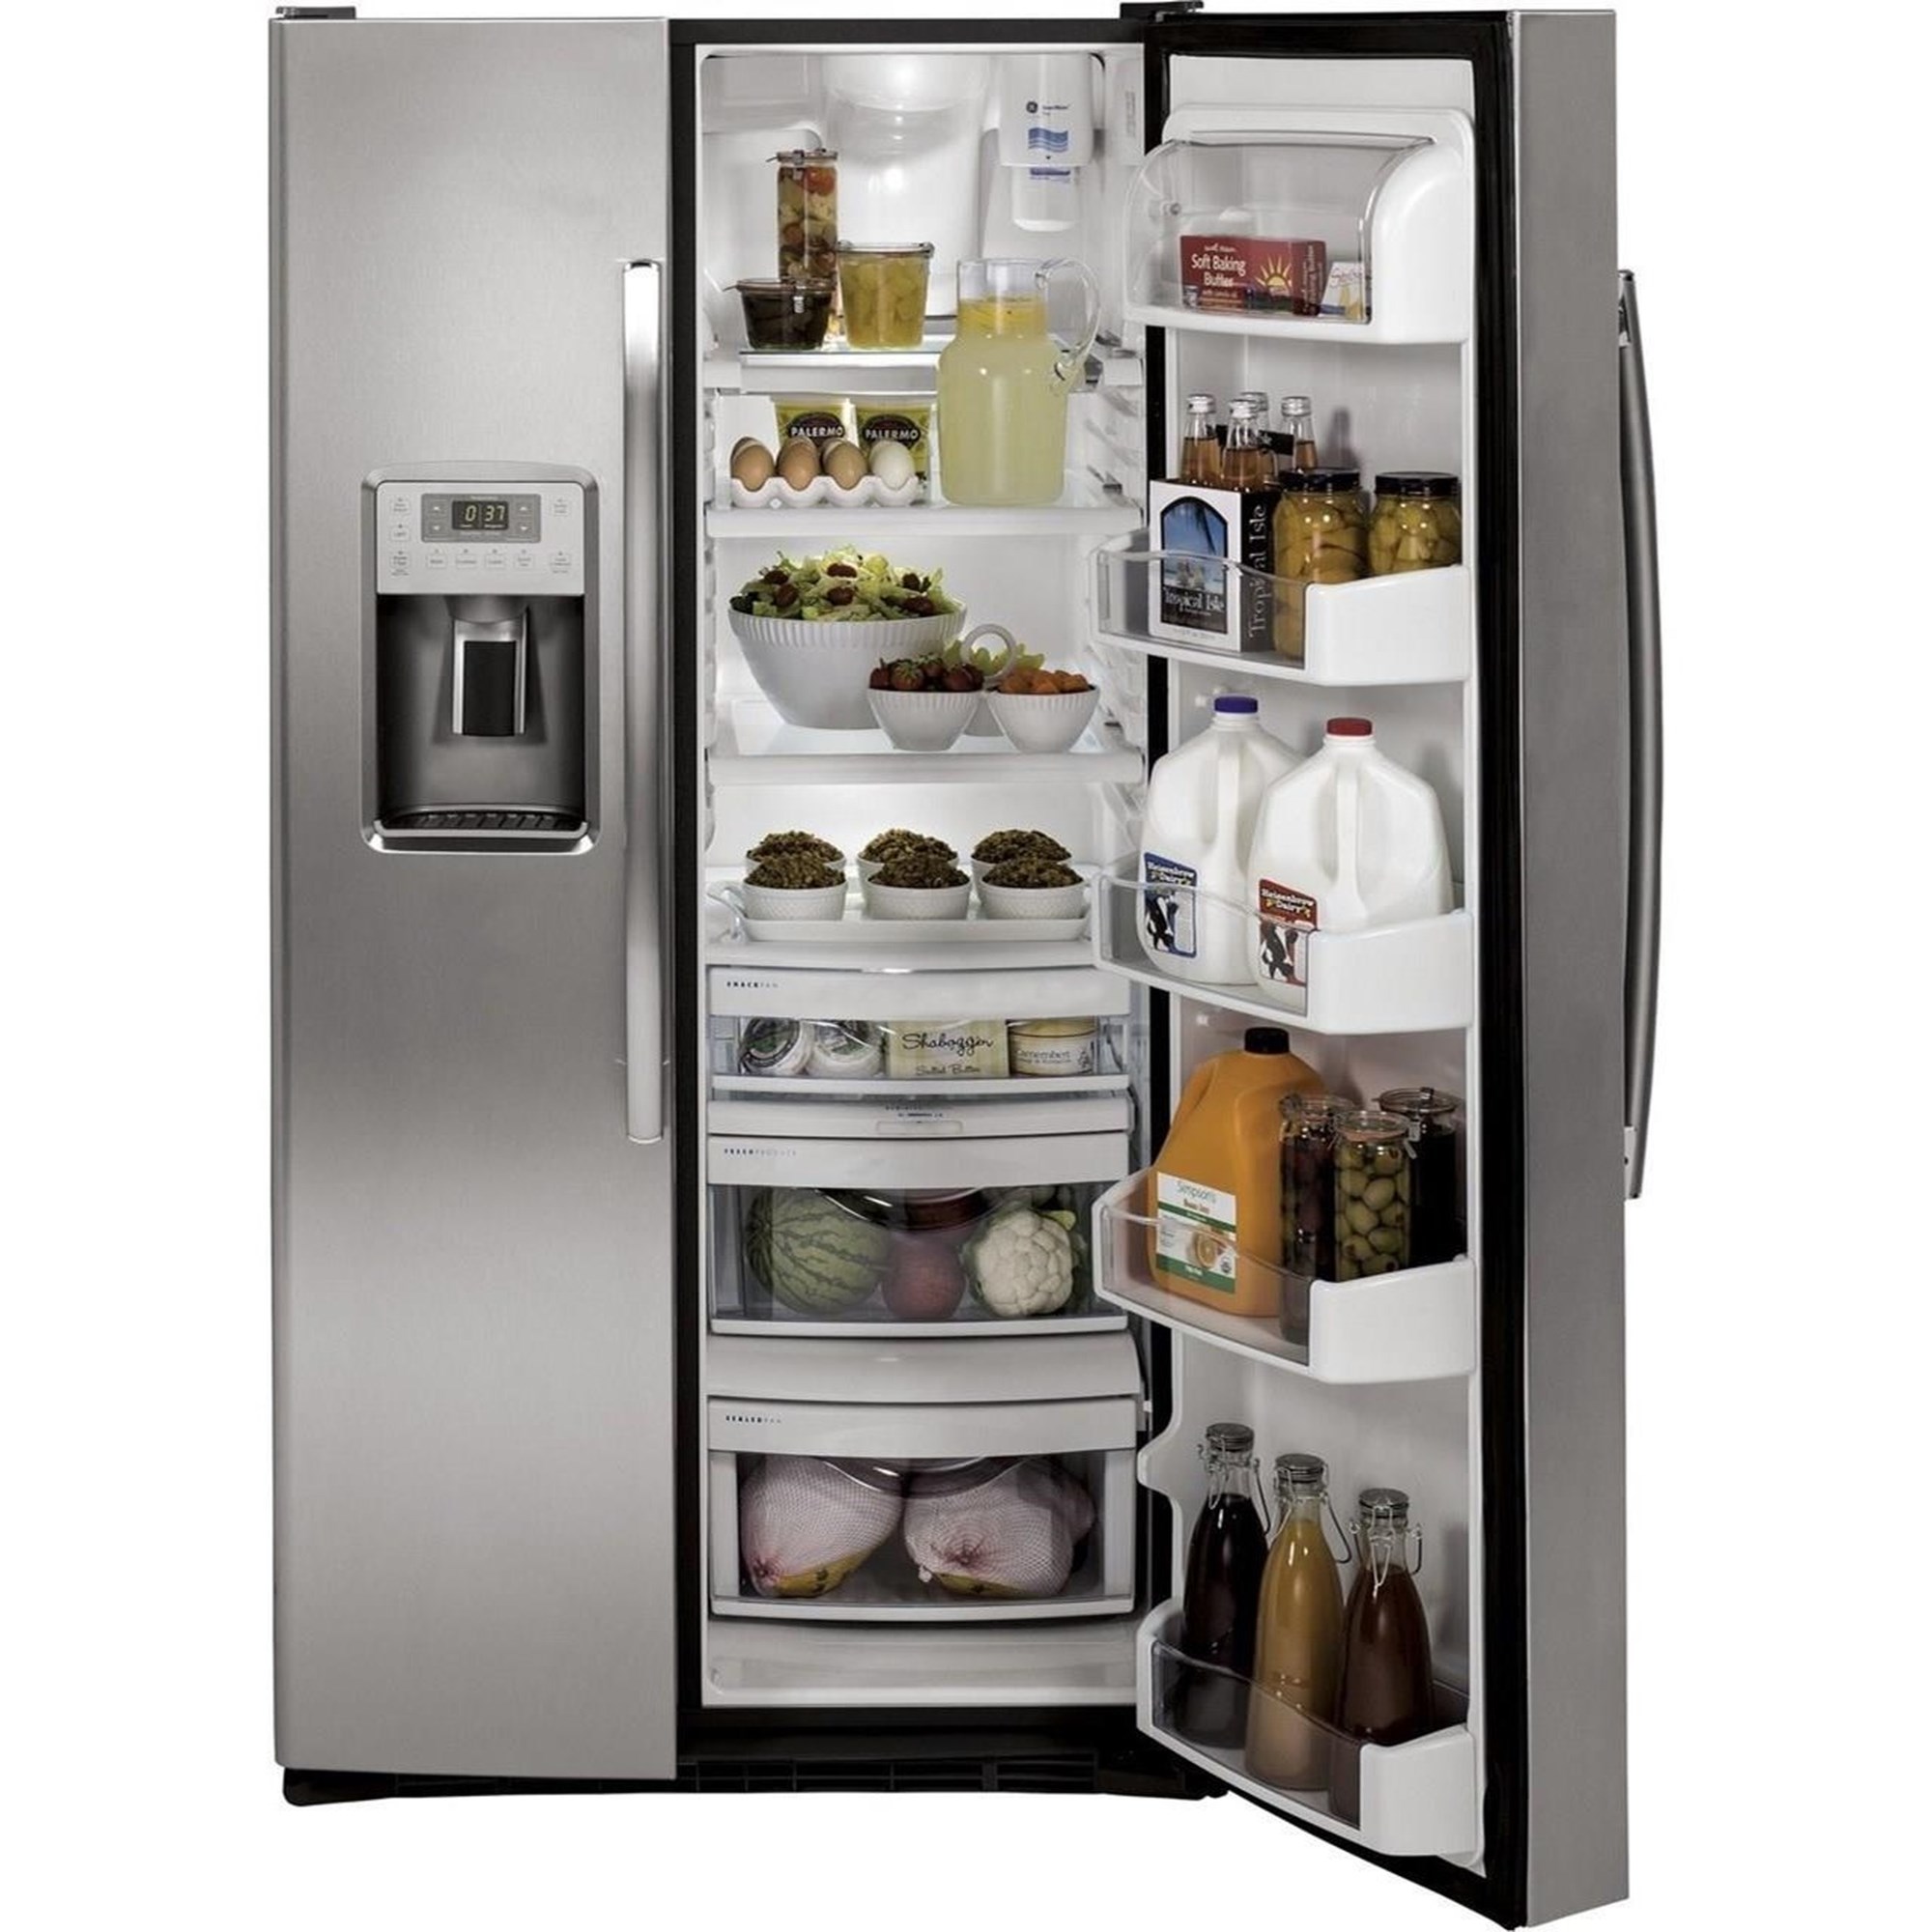 PSB48YSNSS GE Profile Series 48 Smart Built-In Side-by-Side Refrigerator  with Dispenser - Stainless Steel